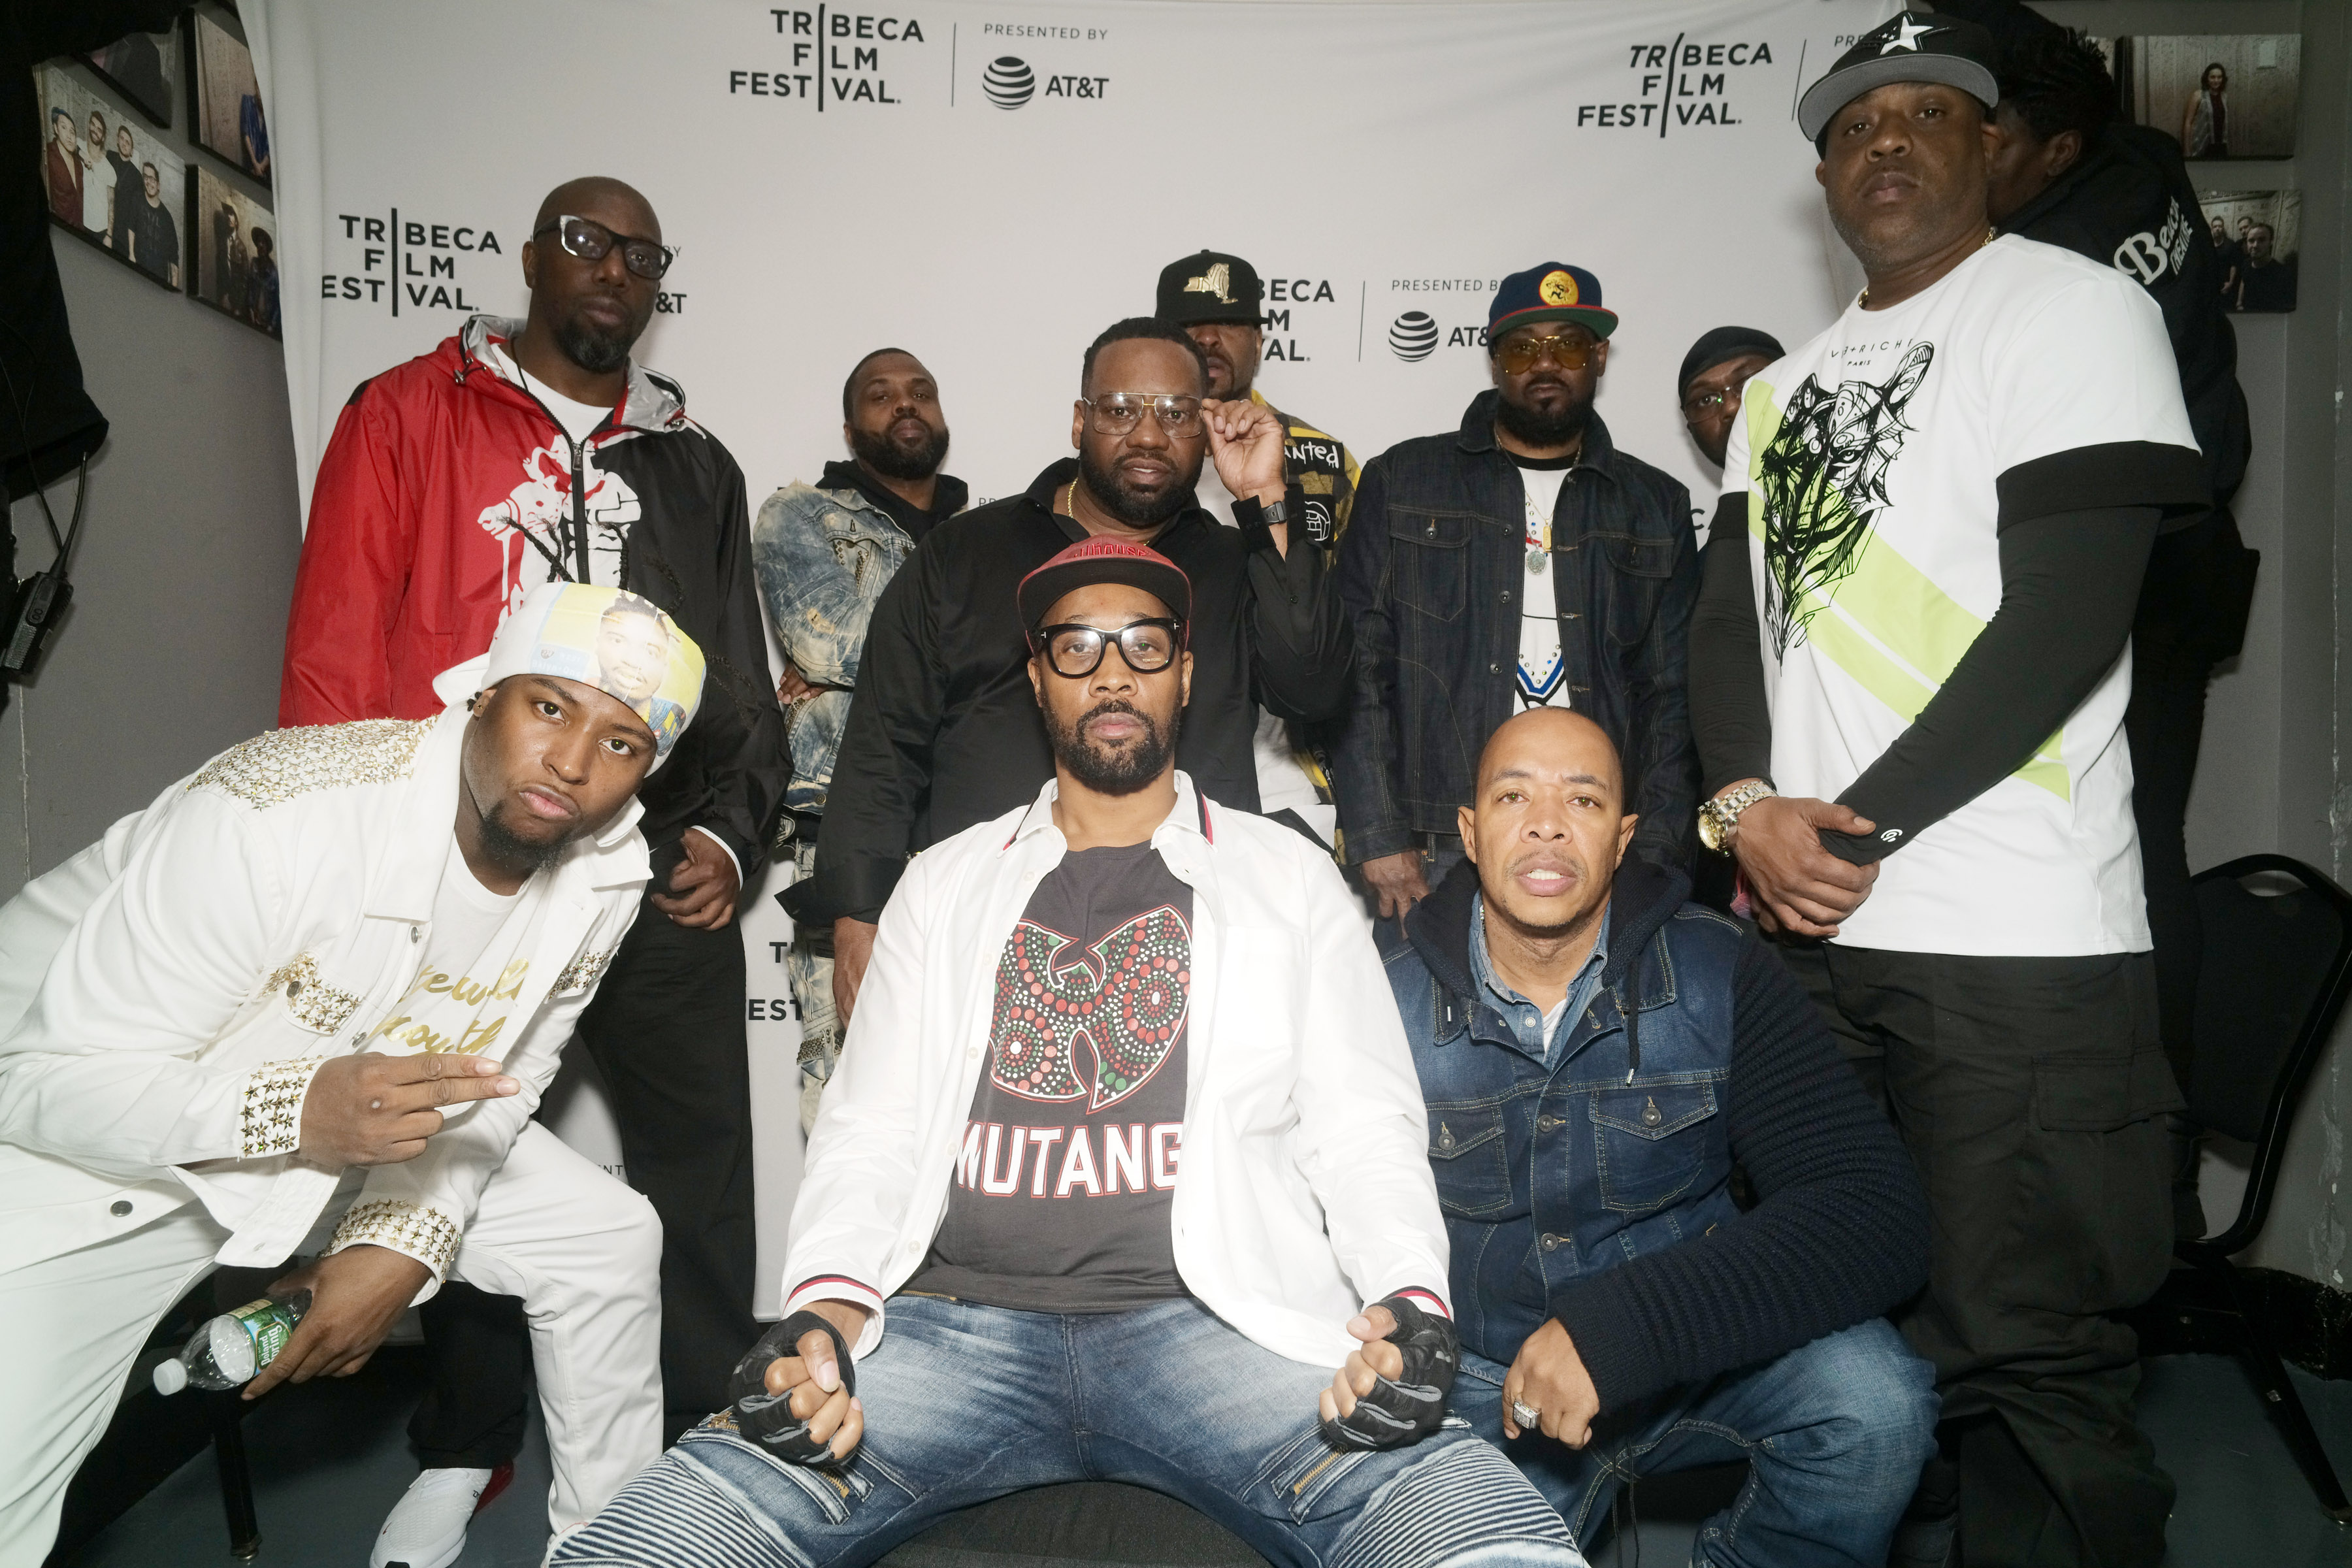 Wu-Tang Clan’s “Once Upon A Time In Shaolin” Owner Revealed